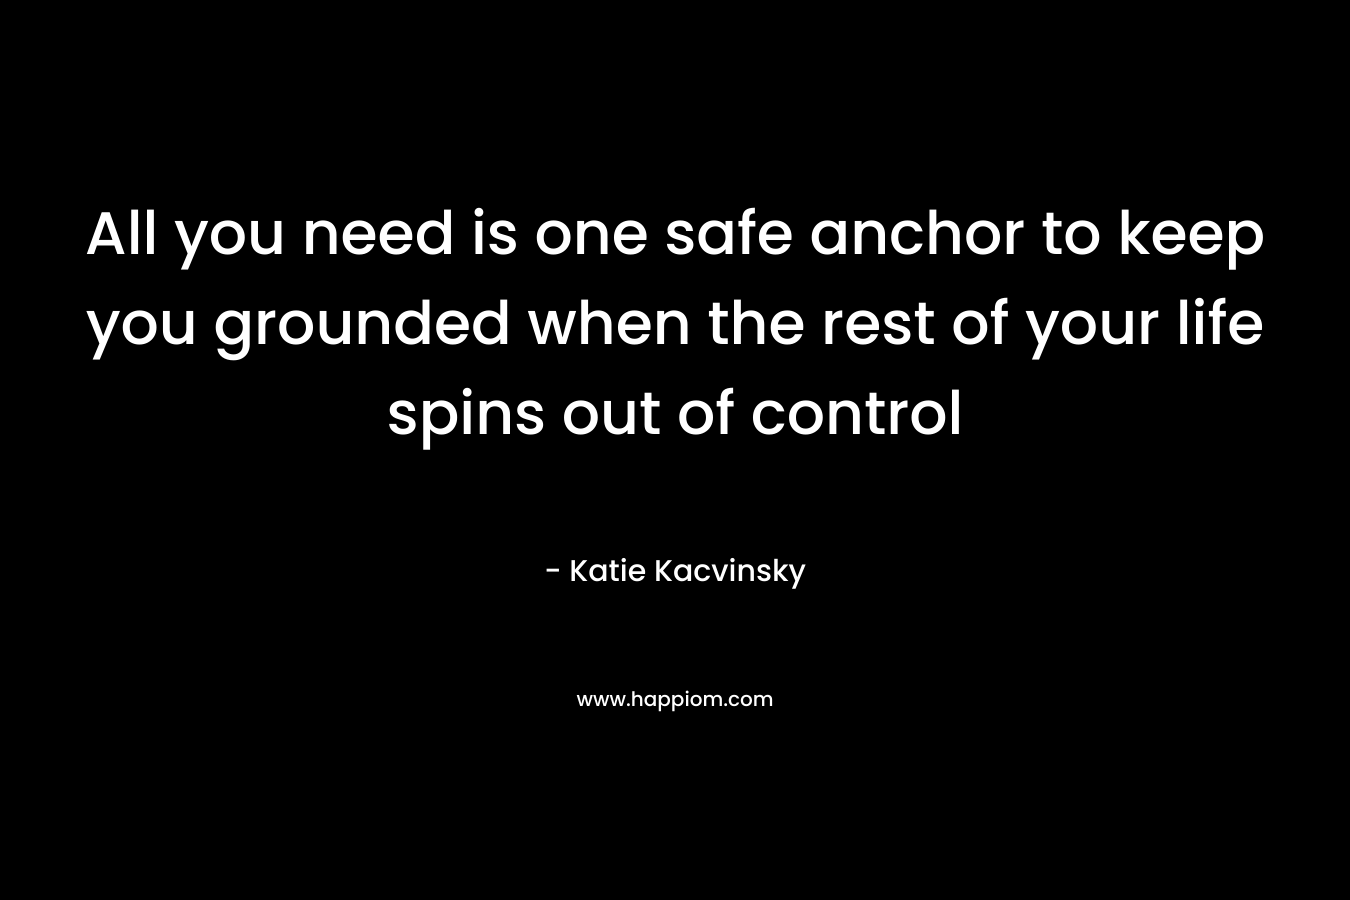 All you need is one safe anchor to keep you grounded when the rest of your life spins out of control